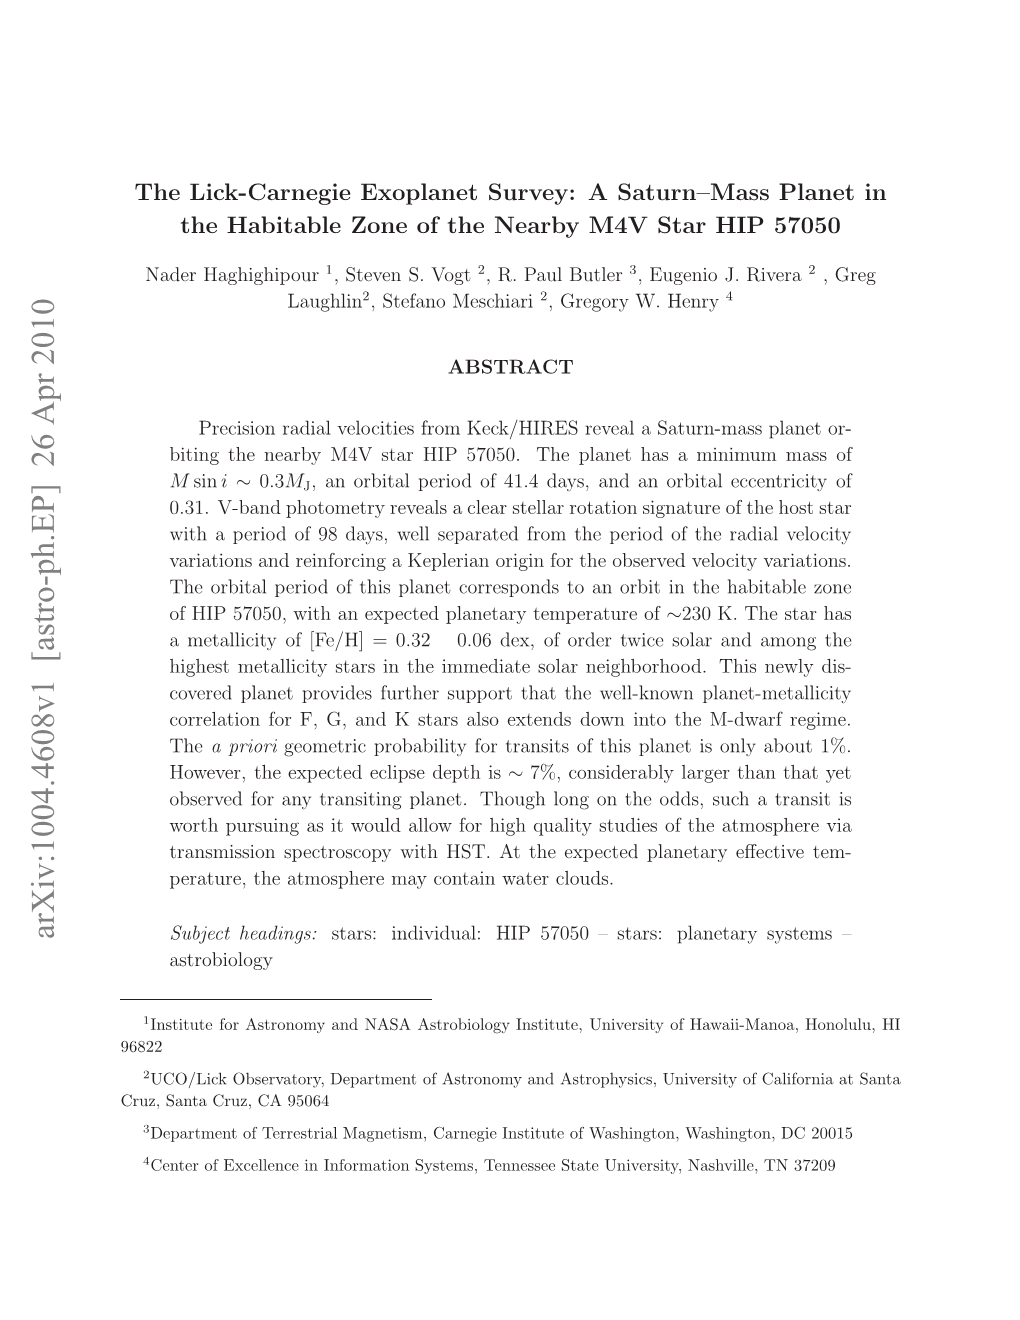 The Lick-Carnegie Exoplanet Survey: a Saturn-Mass Planet in The